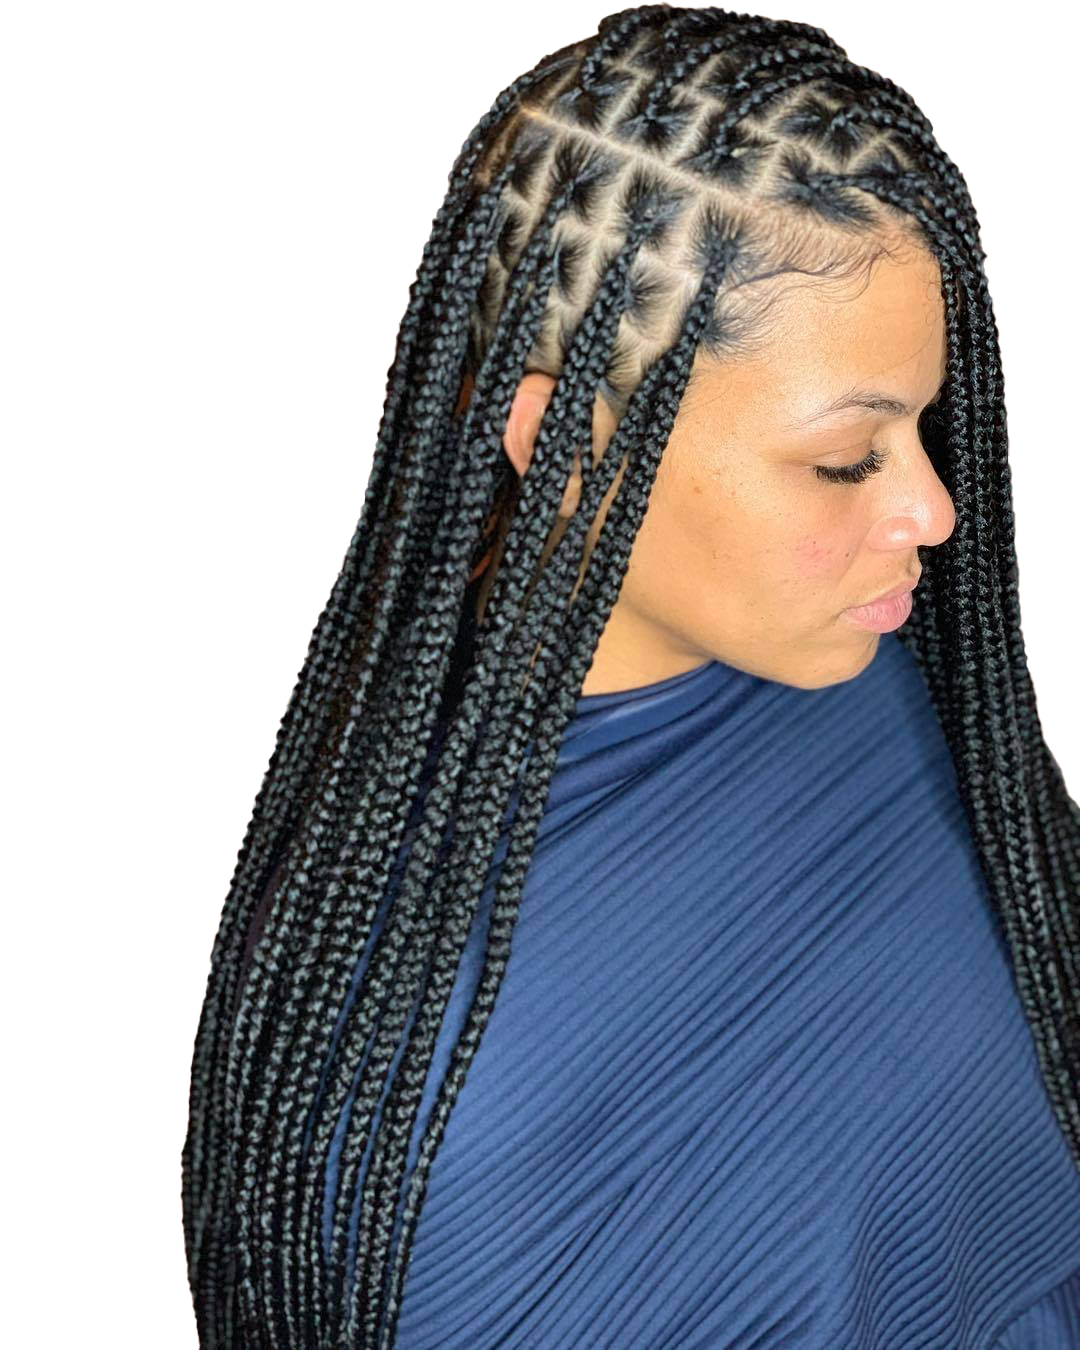 Download Picture Hairstyle Braids PNG File HD HQ PNG Image | FreePNGImg